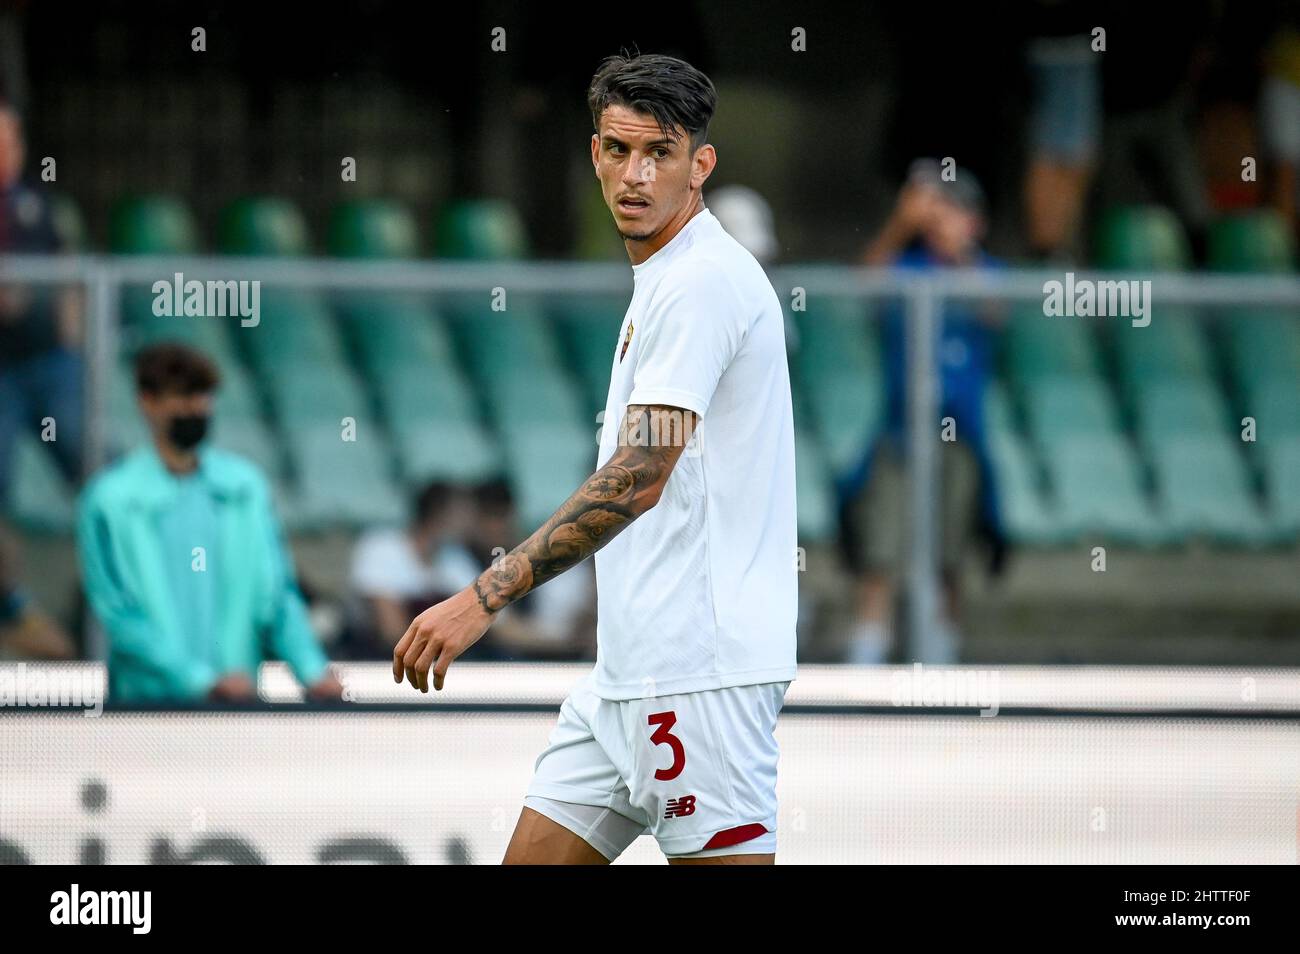 Verona, Italy. 19th Sep, 2021. Roma's Roger Ibanez da Silva portrait during Hellas Verona FC vs AS Roma (Archive portraits), italian soccer Serie A match in Verona, Italy, September 19 2021 Credit: Independent Photo Agency/Alamy Live News Stock Photo